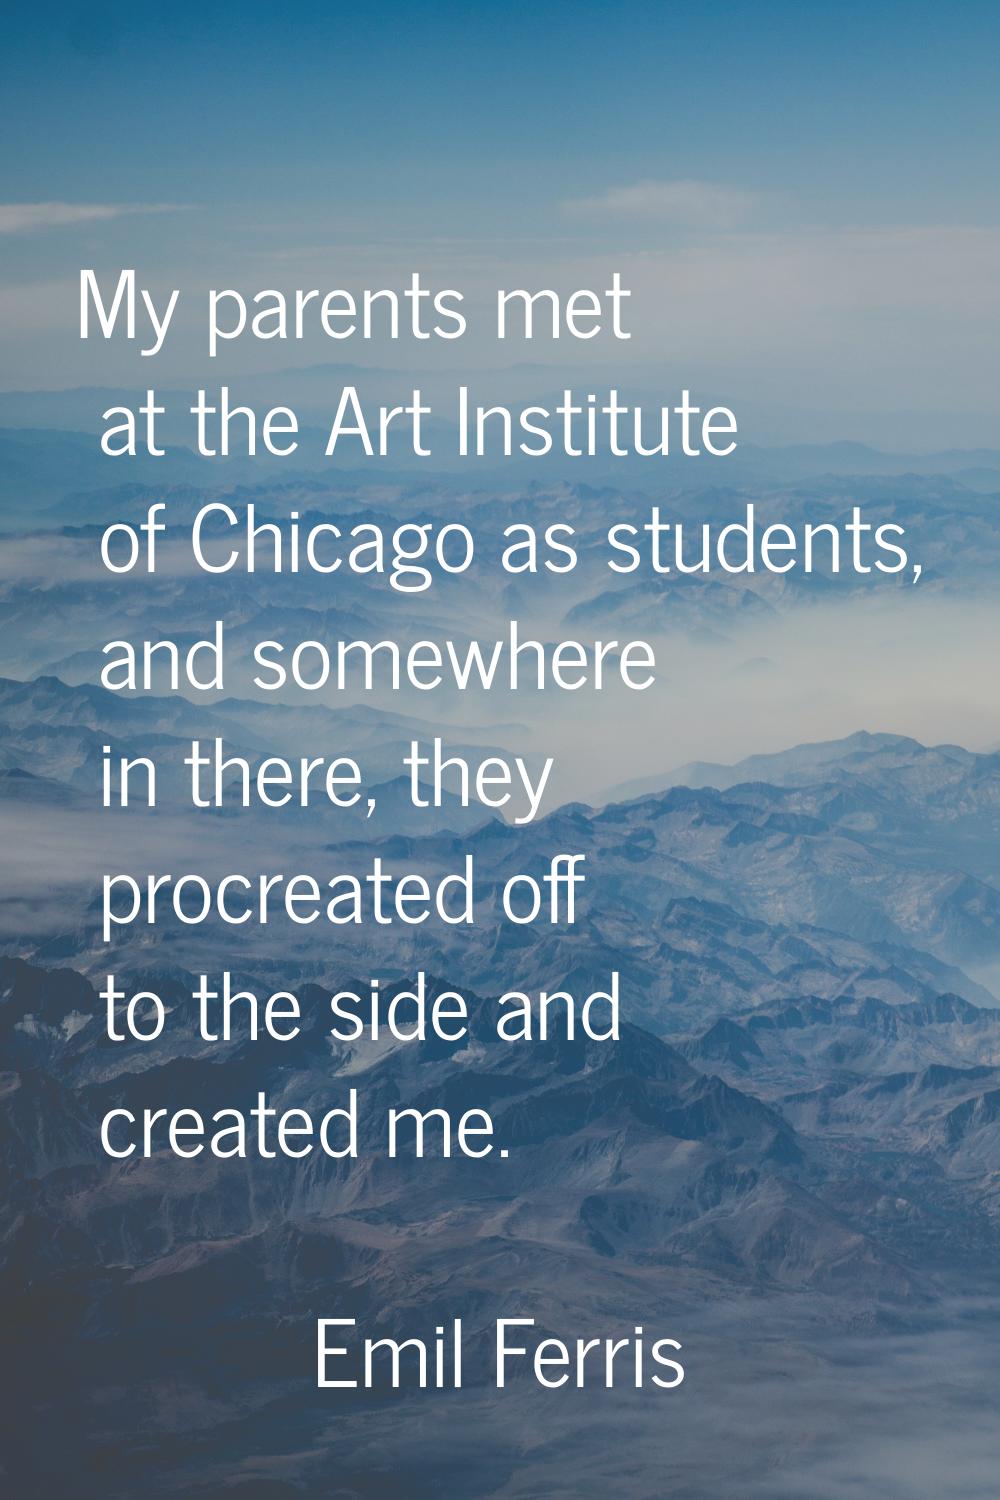 My parents met at the Art Institute of Chicago as students, and somewhere in there, they procreated